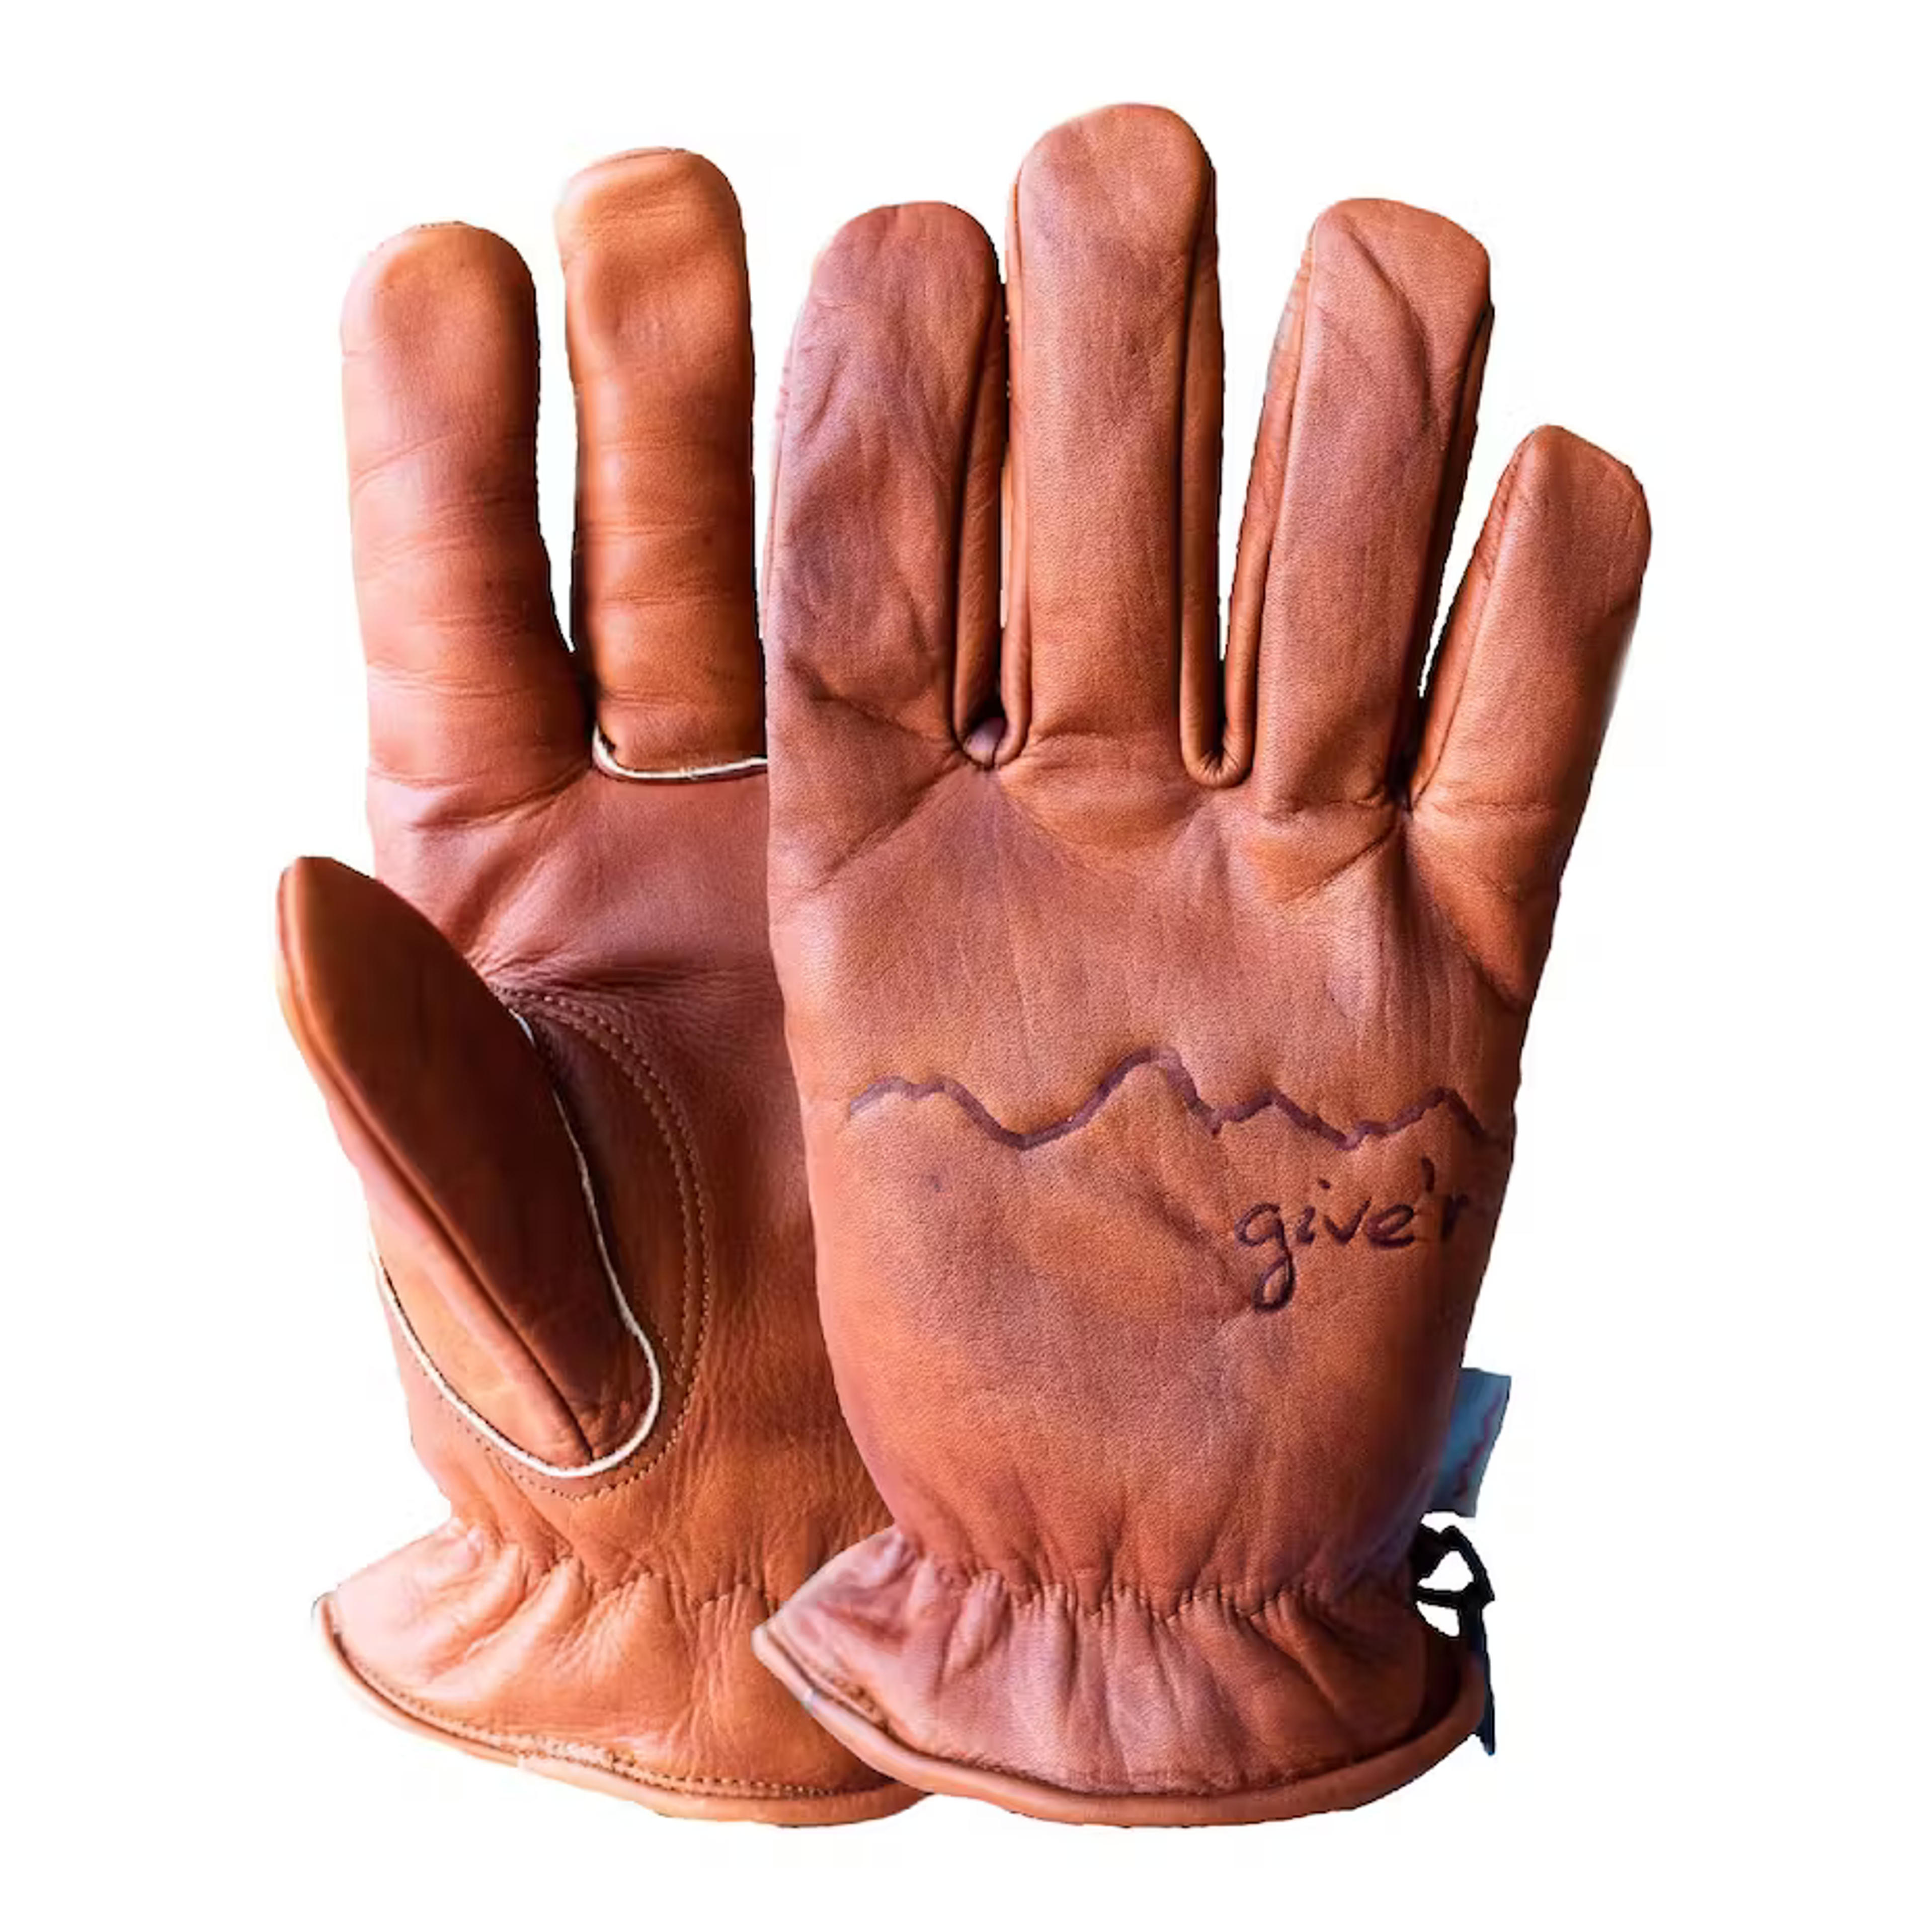 Give'r Classic Gloves - Exclusive - Chestnut | Gloves & Scarves | Huckberry